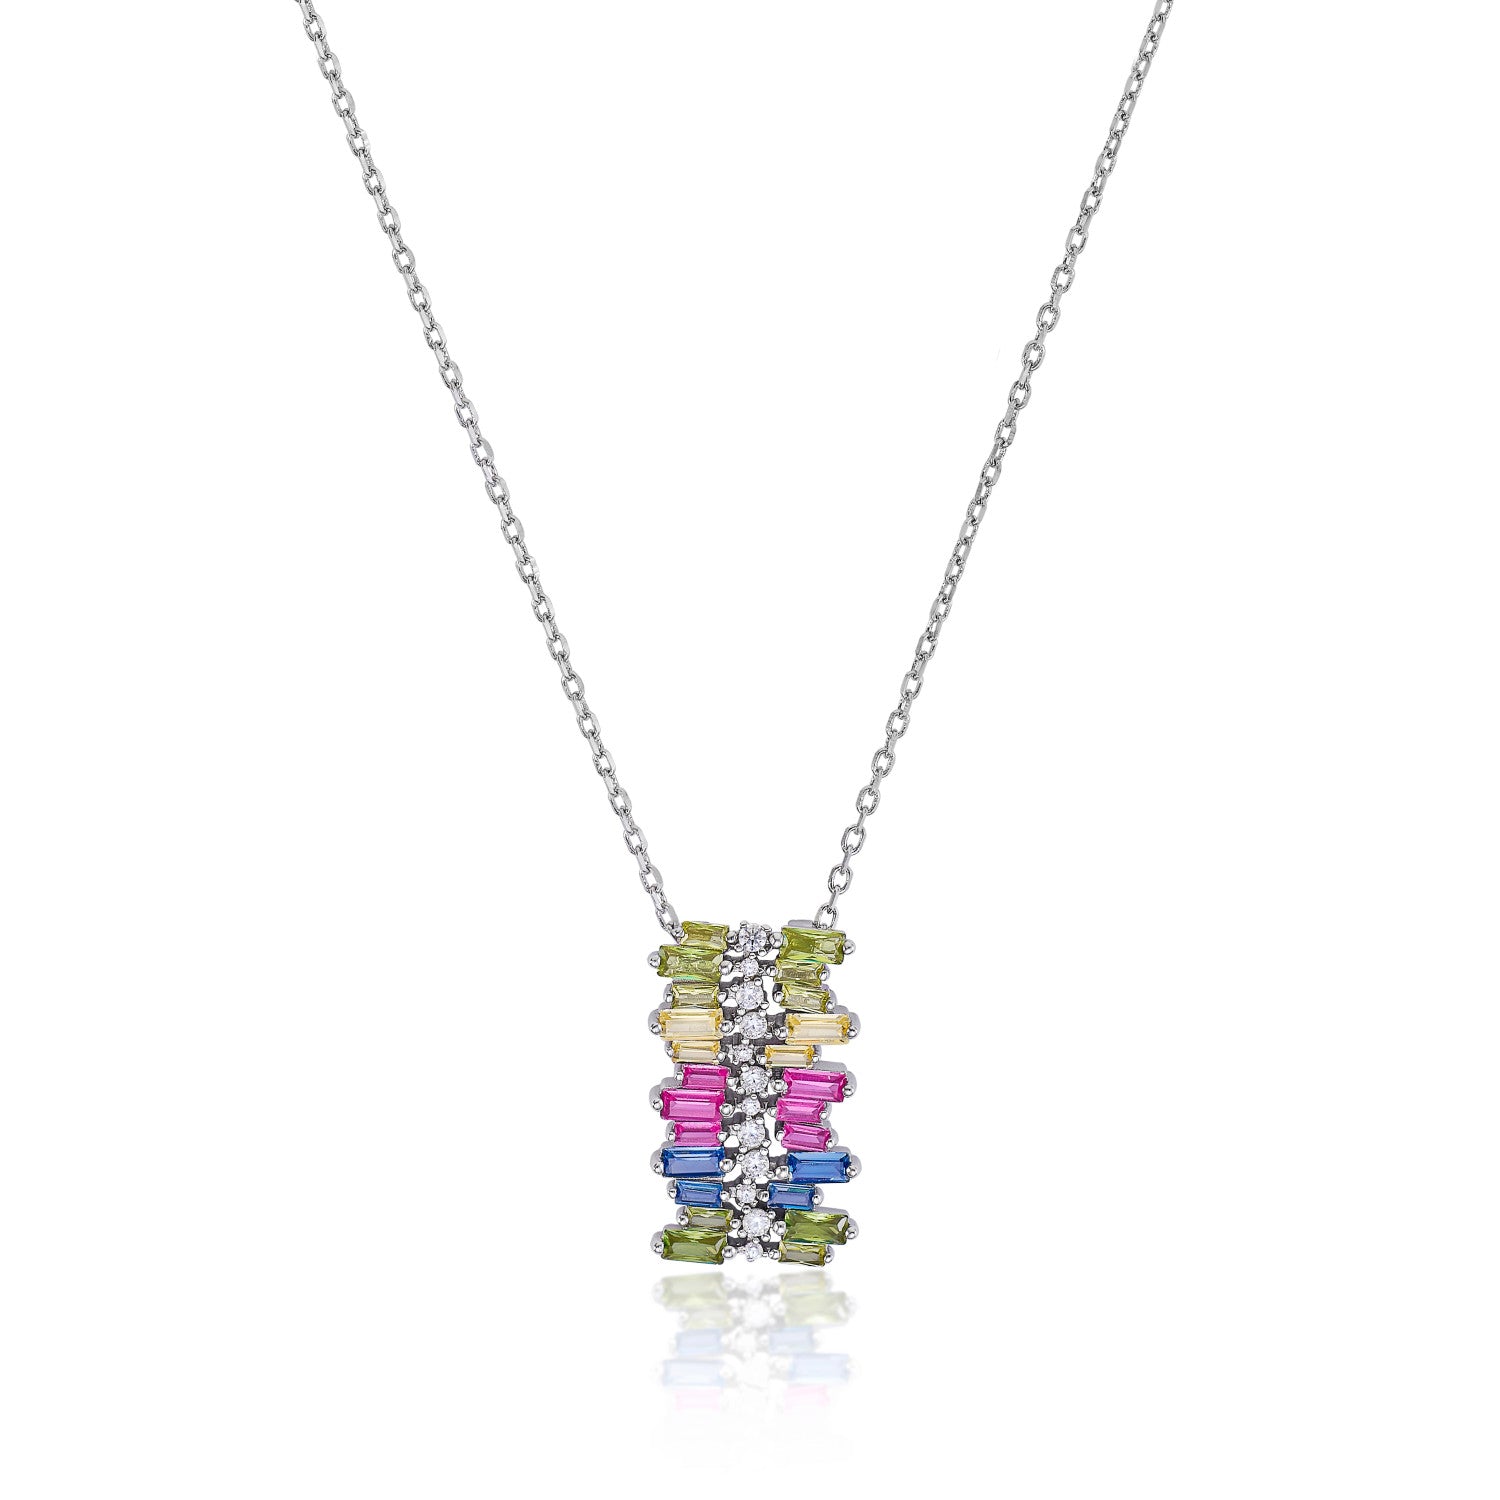 Necklaces with stones with multicolored gemstone design